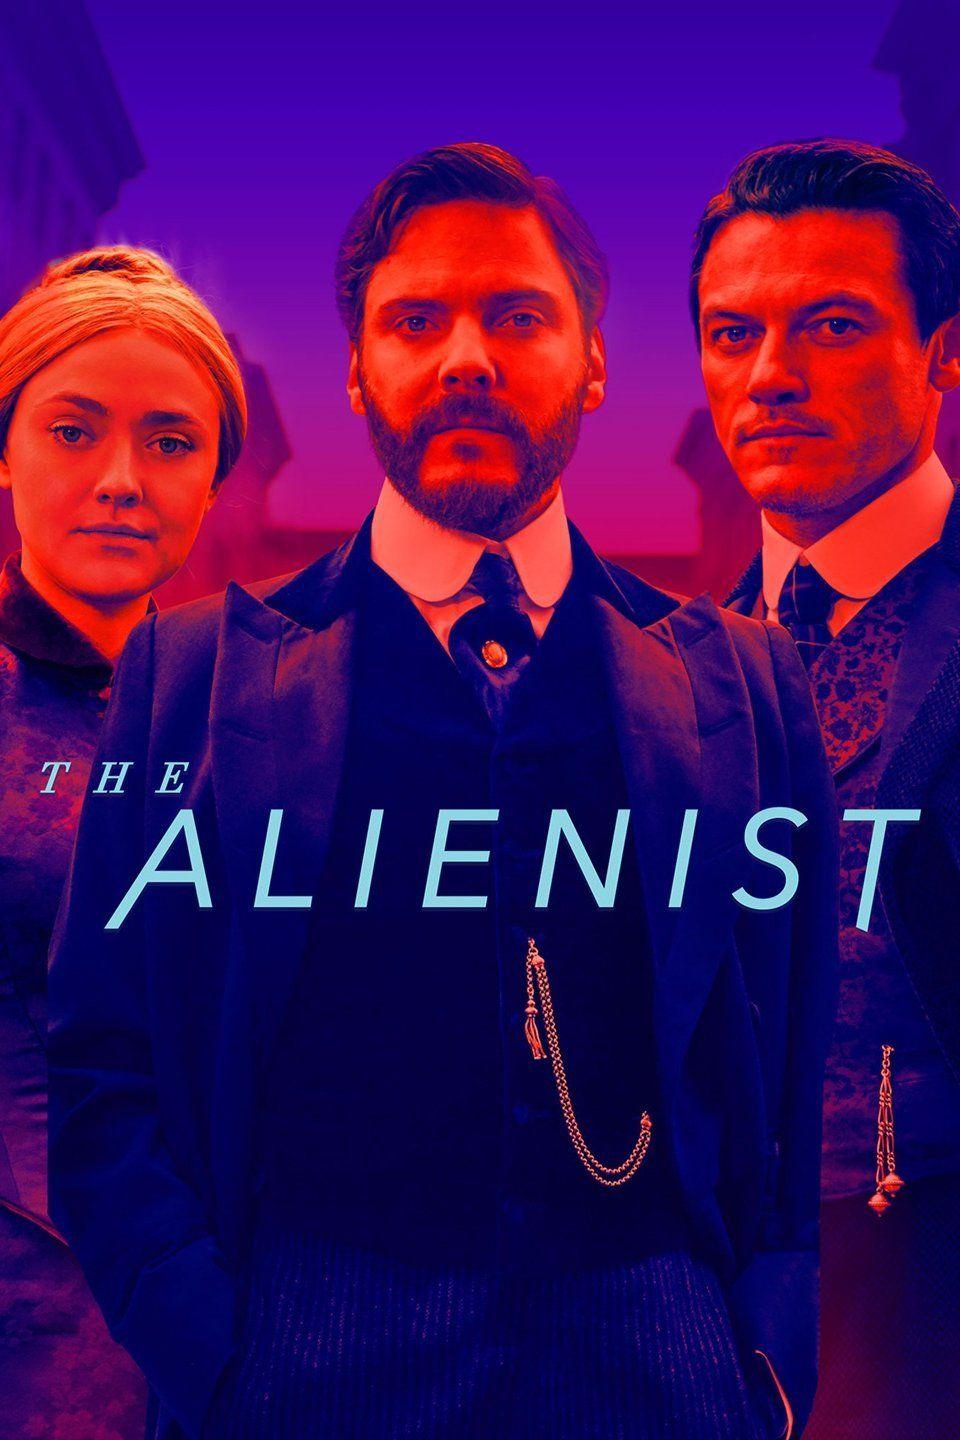 Will Daniel Bruhl Return For The Alienist Season 2  Cast and Streaming - 14